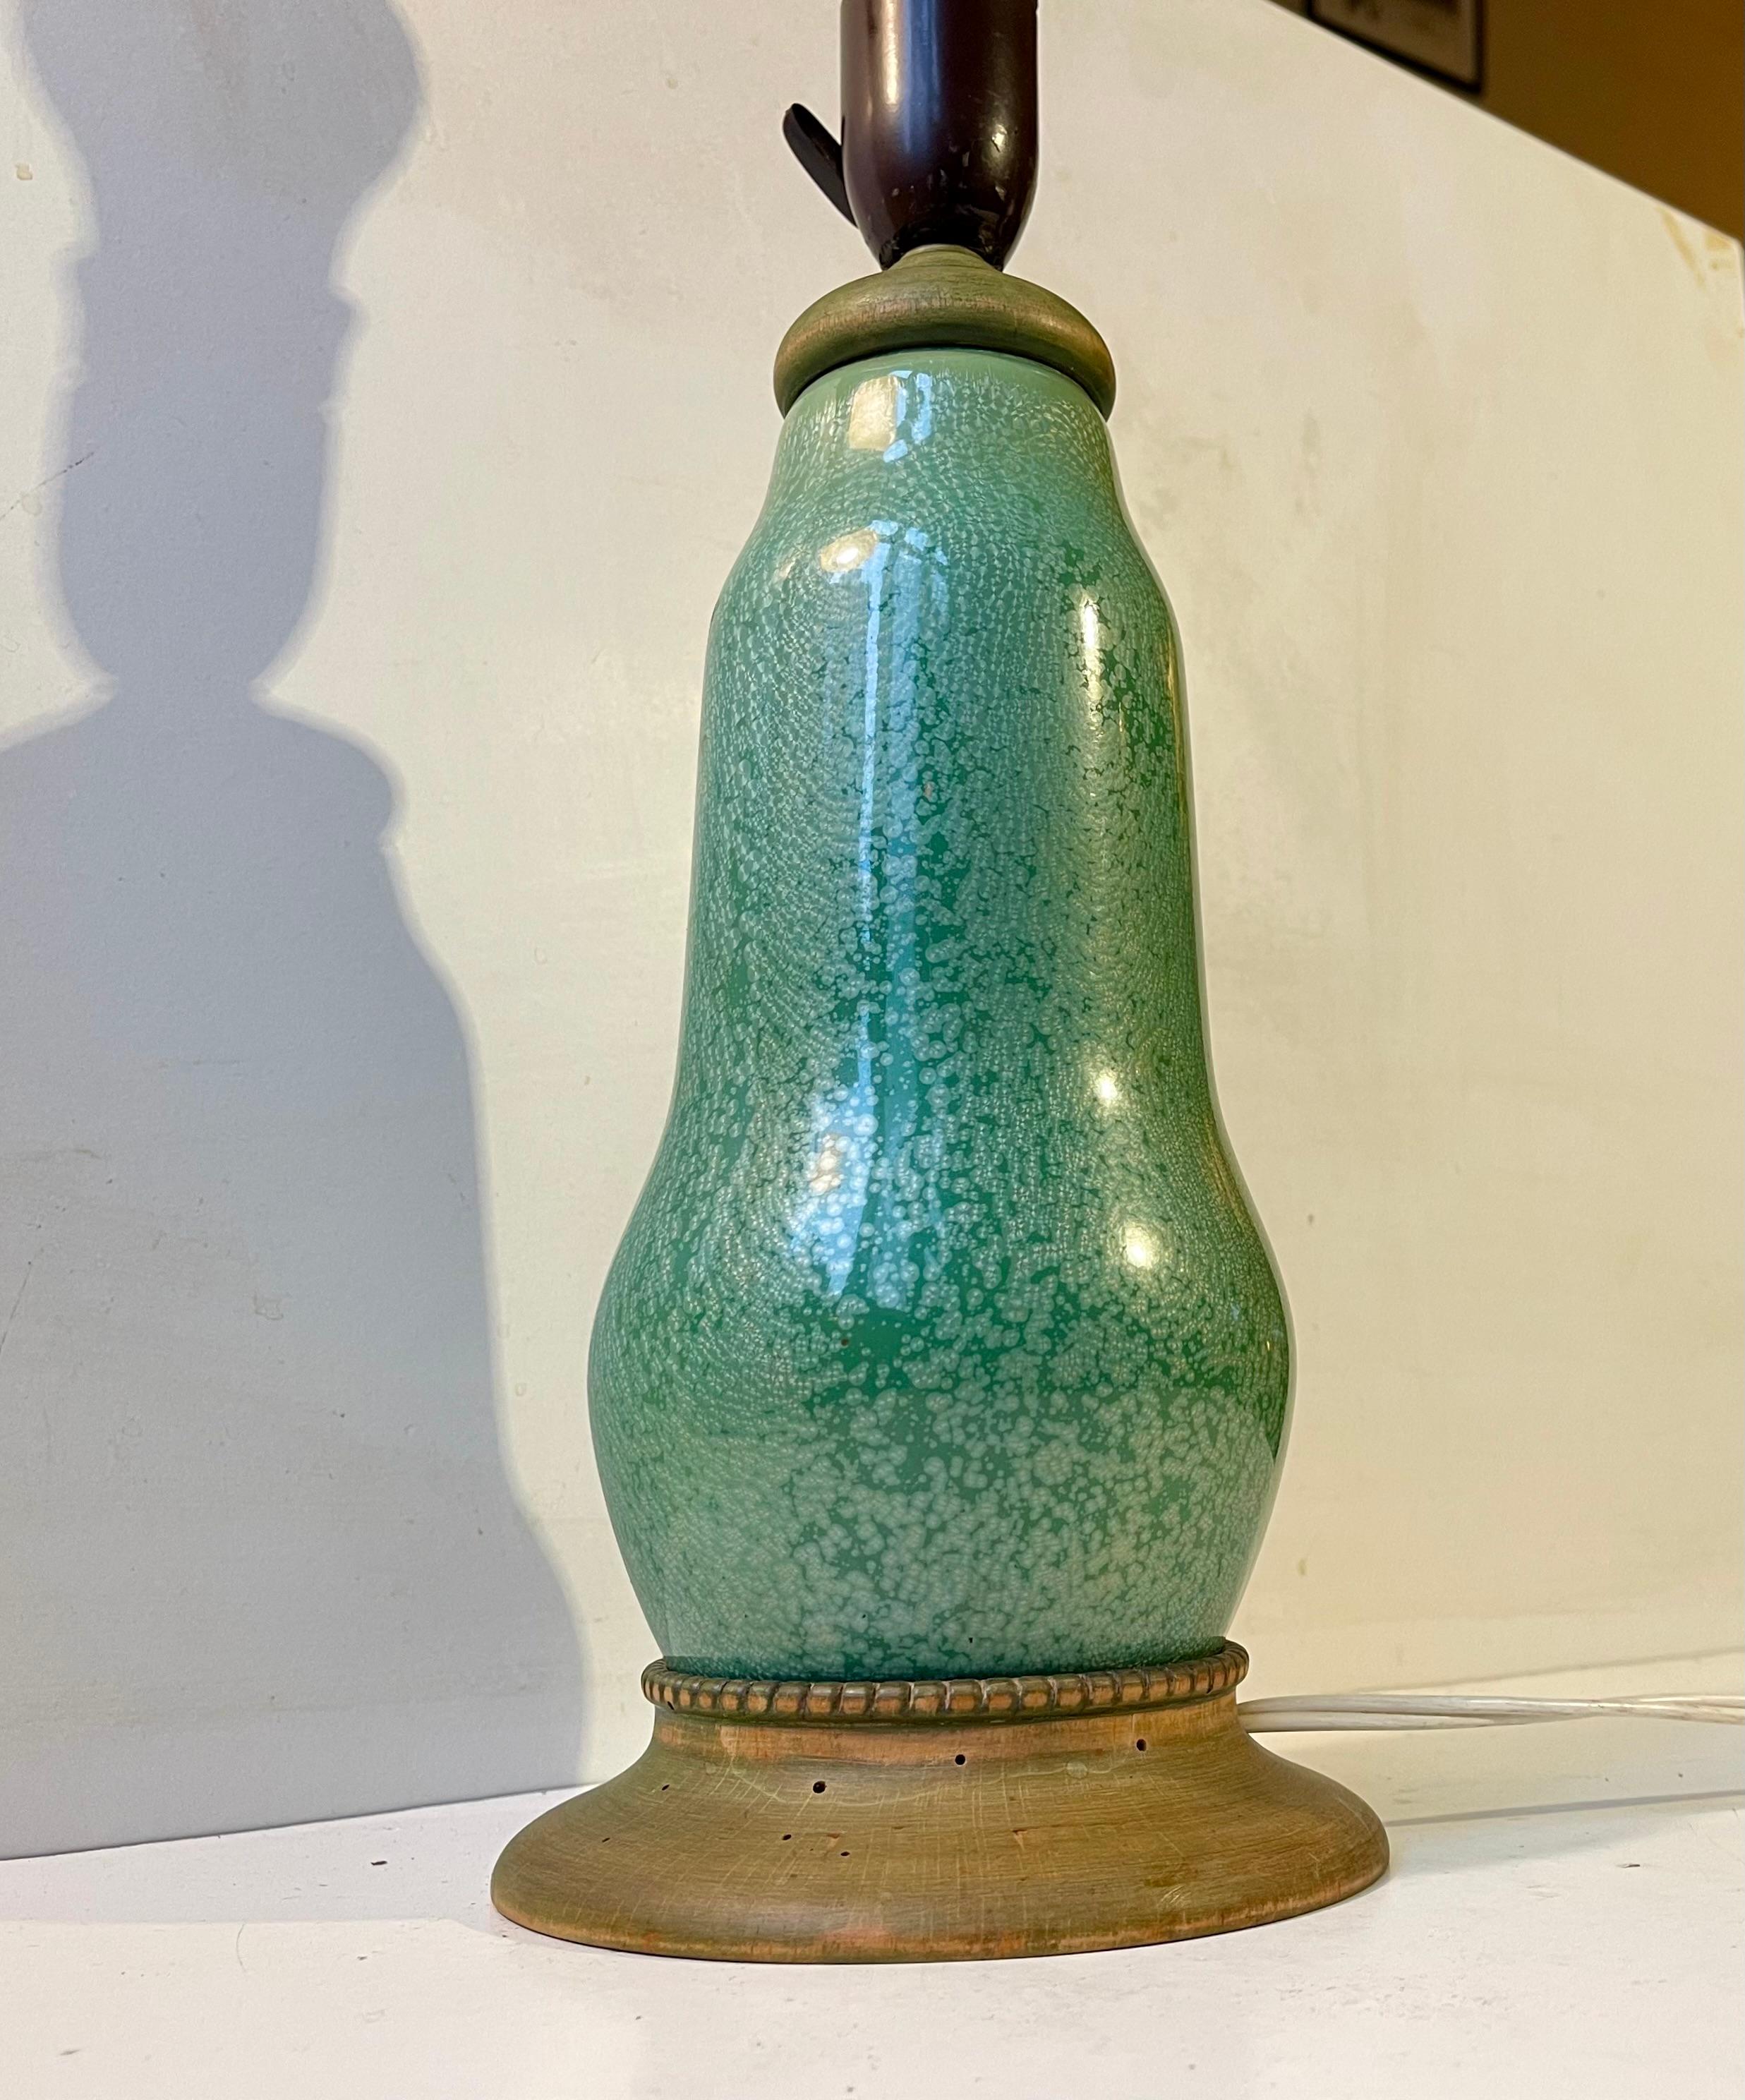 Spectacular French table lamp executed in enamel copper. The style of this gourd table lamp resembles designs by Camillé Faure and Alexandre Marty in particular. It features a wooden base and top in green lacquer. A few worm holes here and there is